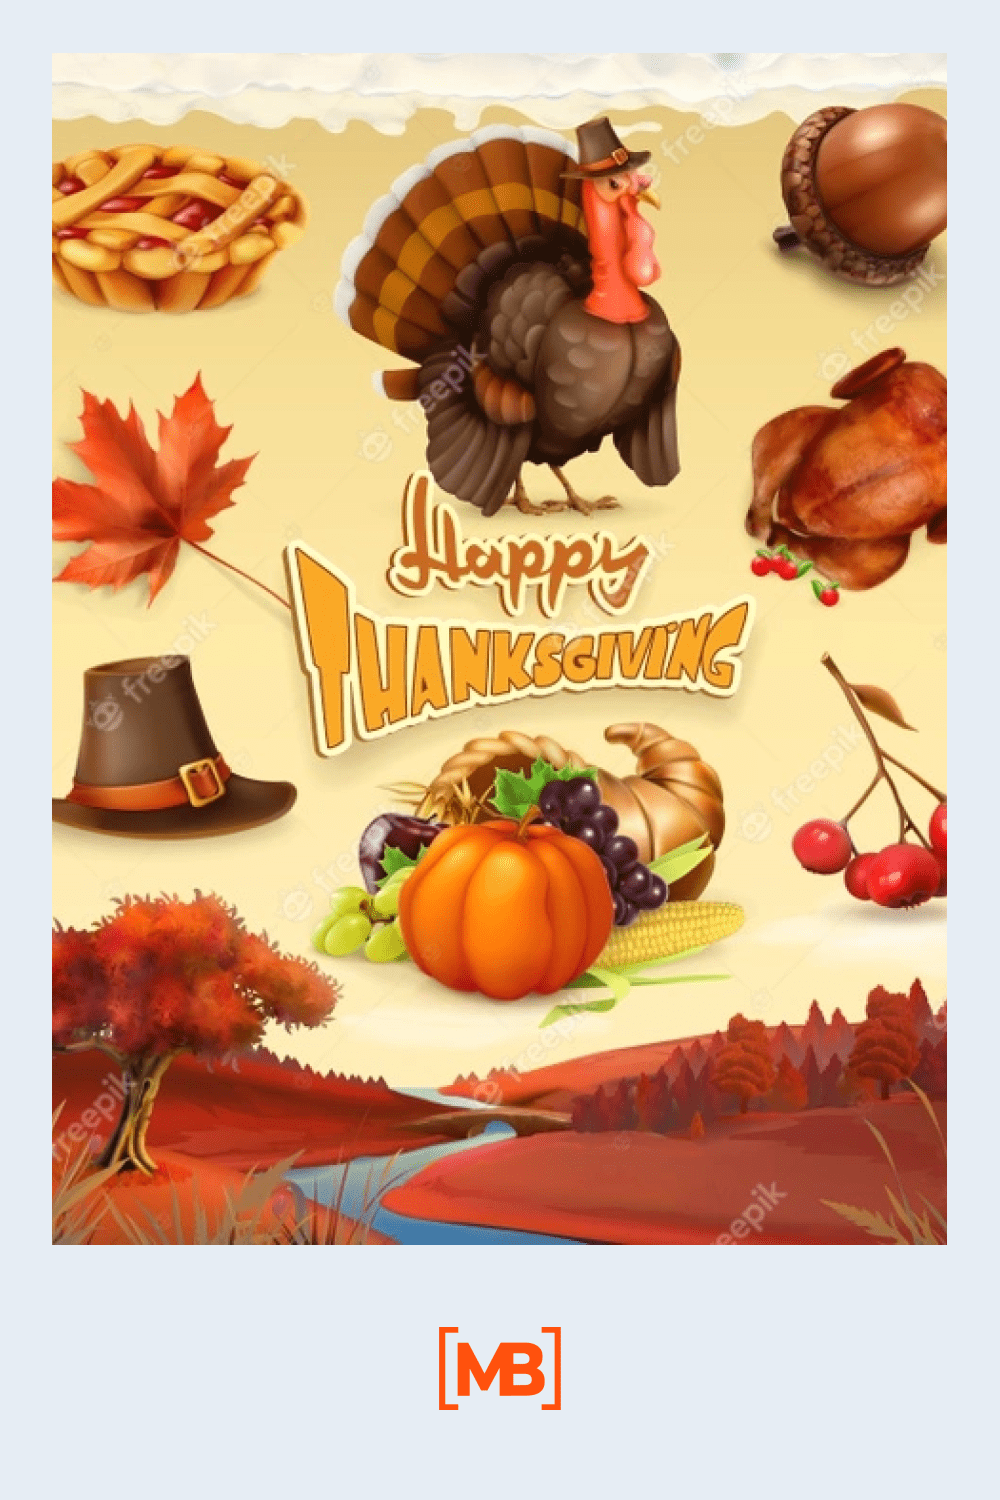 Happy Thanksgiving cartoon character and objects.